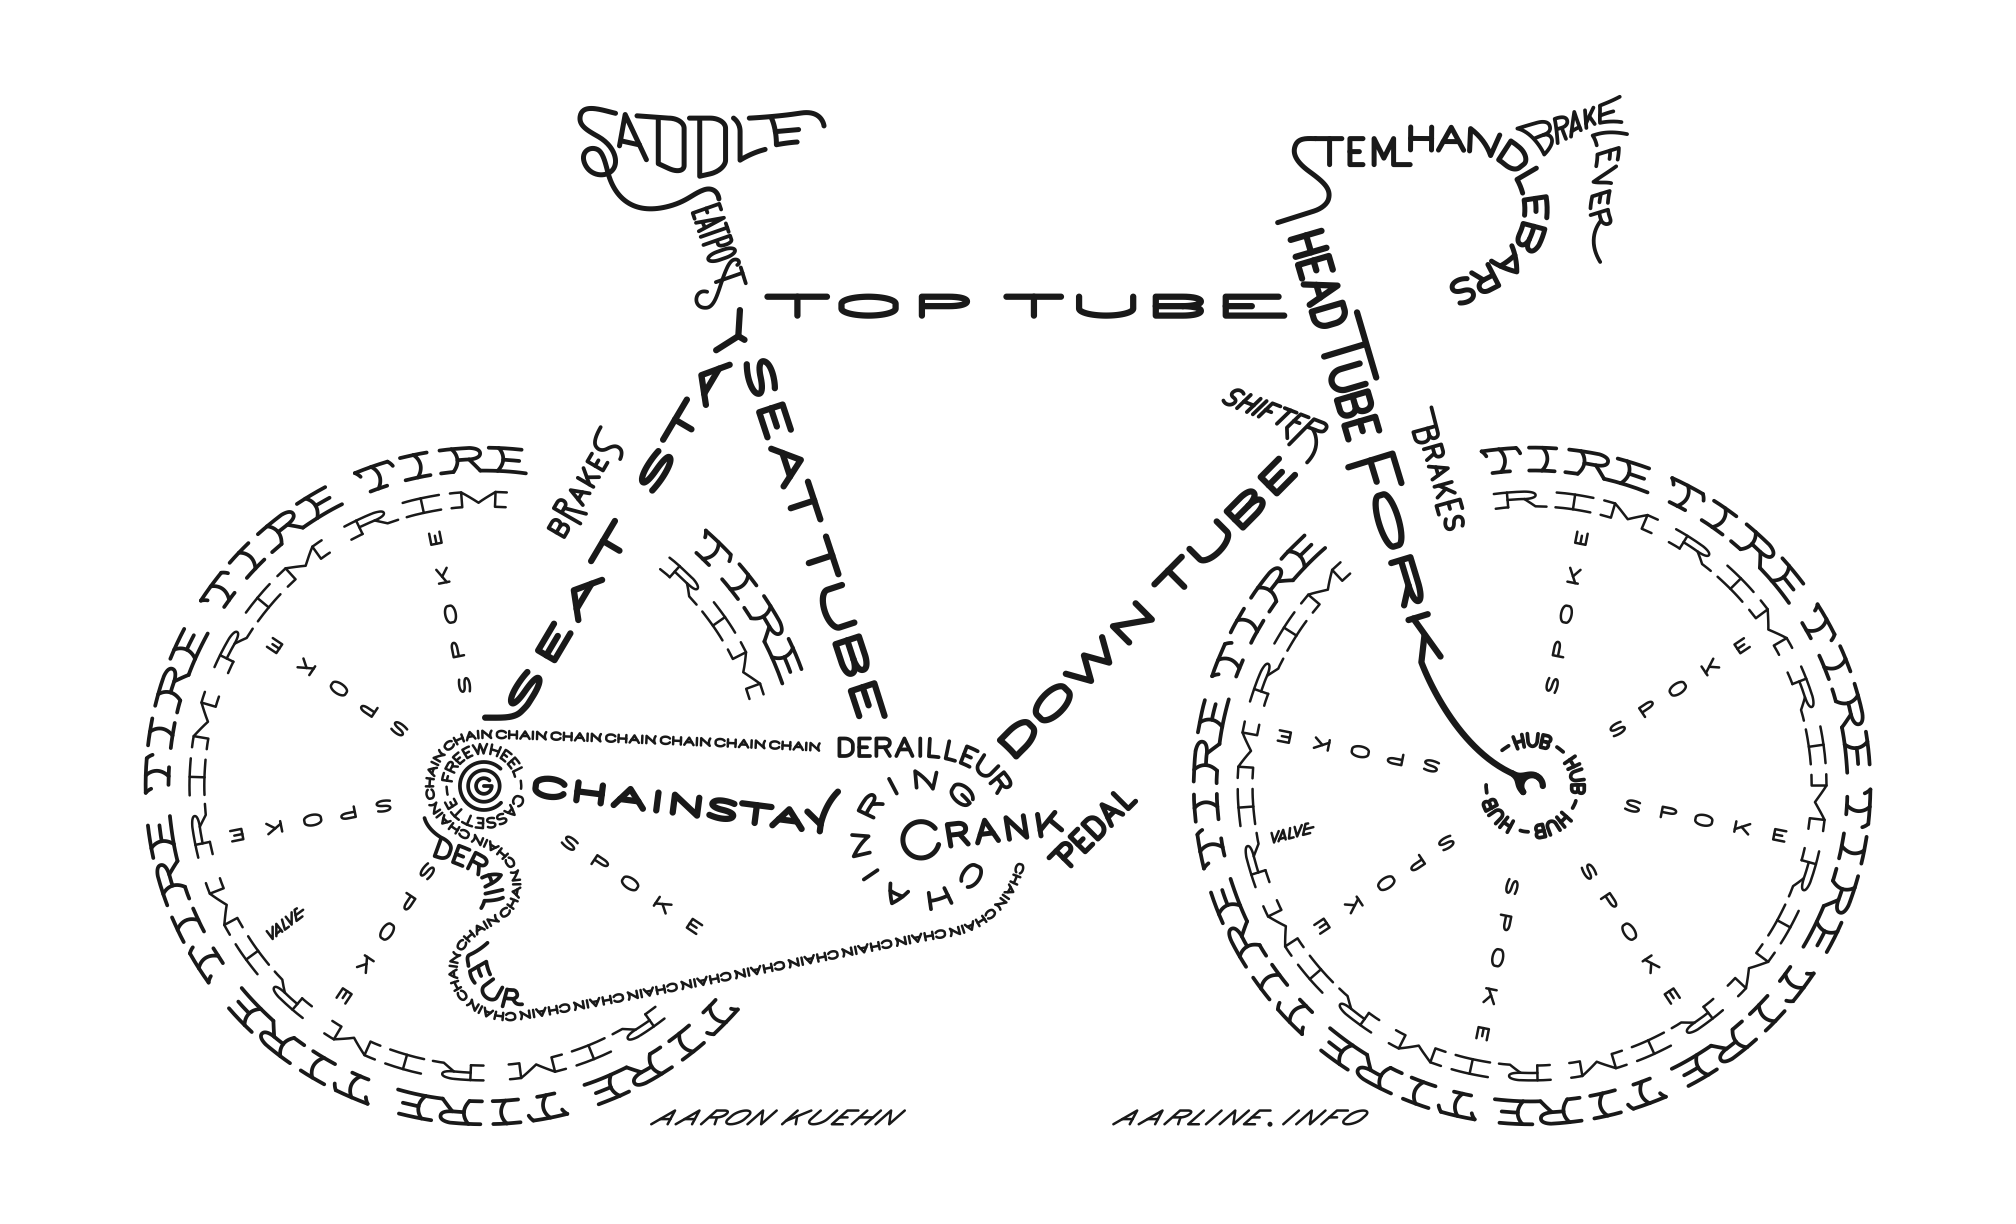 TypographicBicycle_AARLINE_14x8.5.png